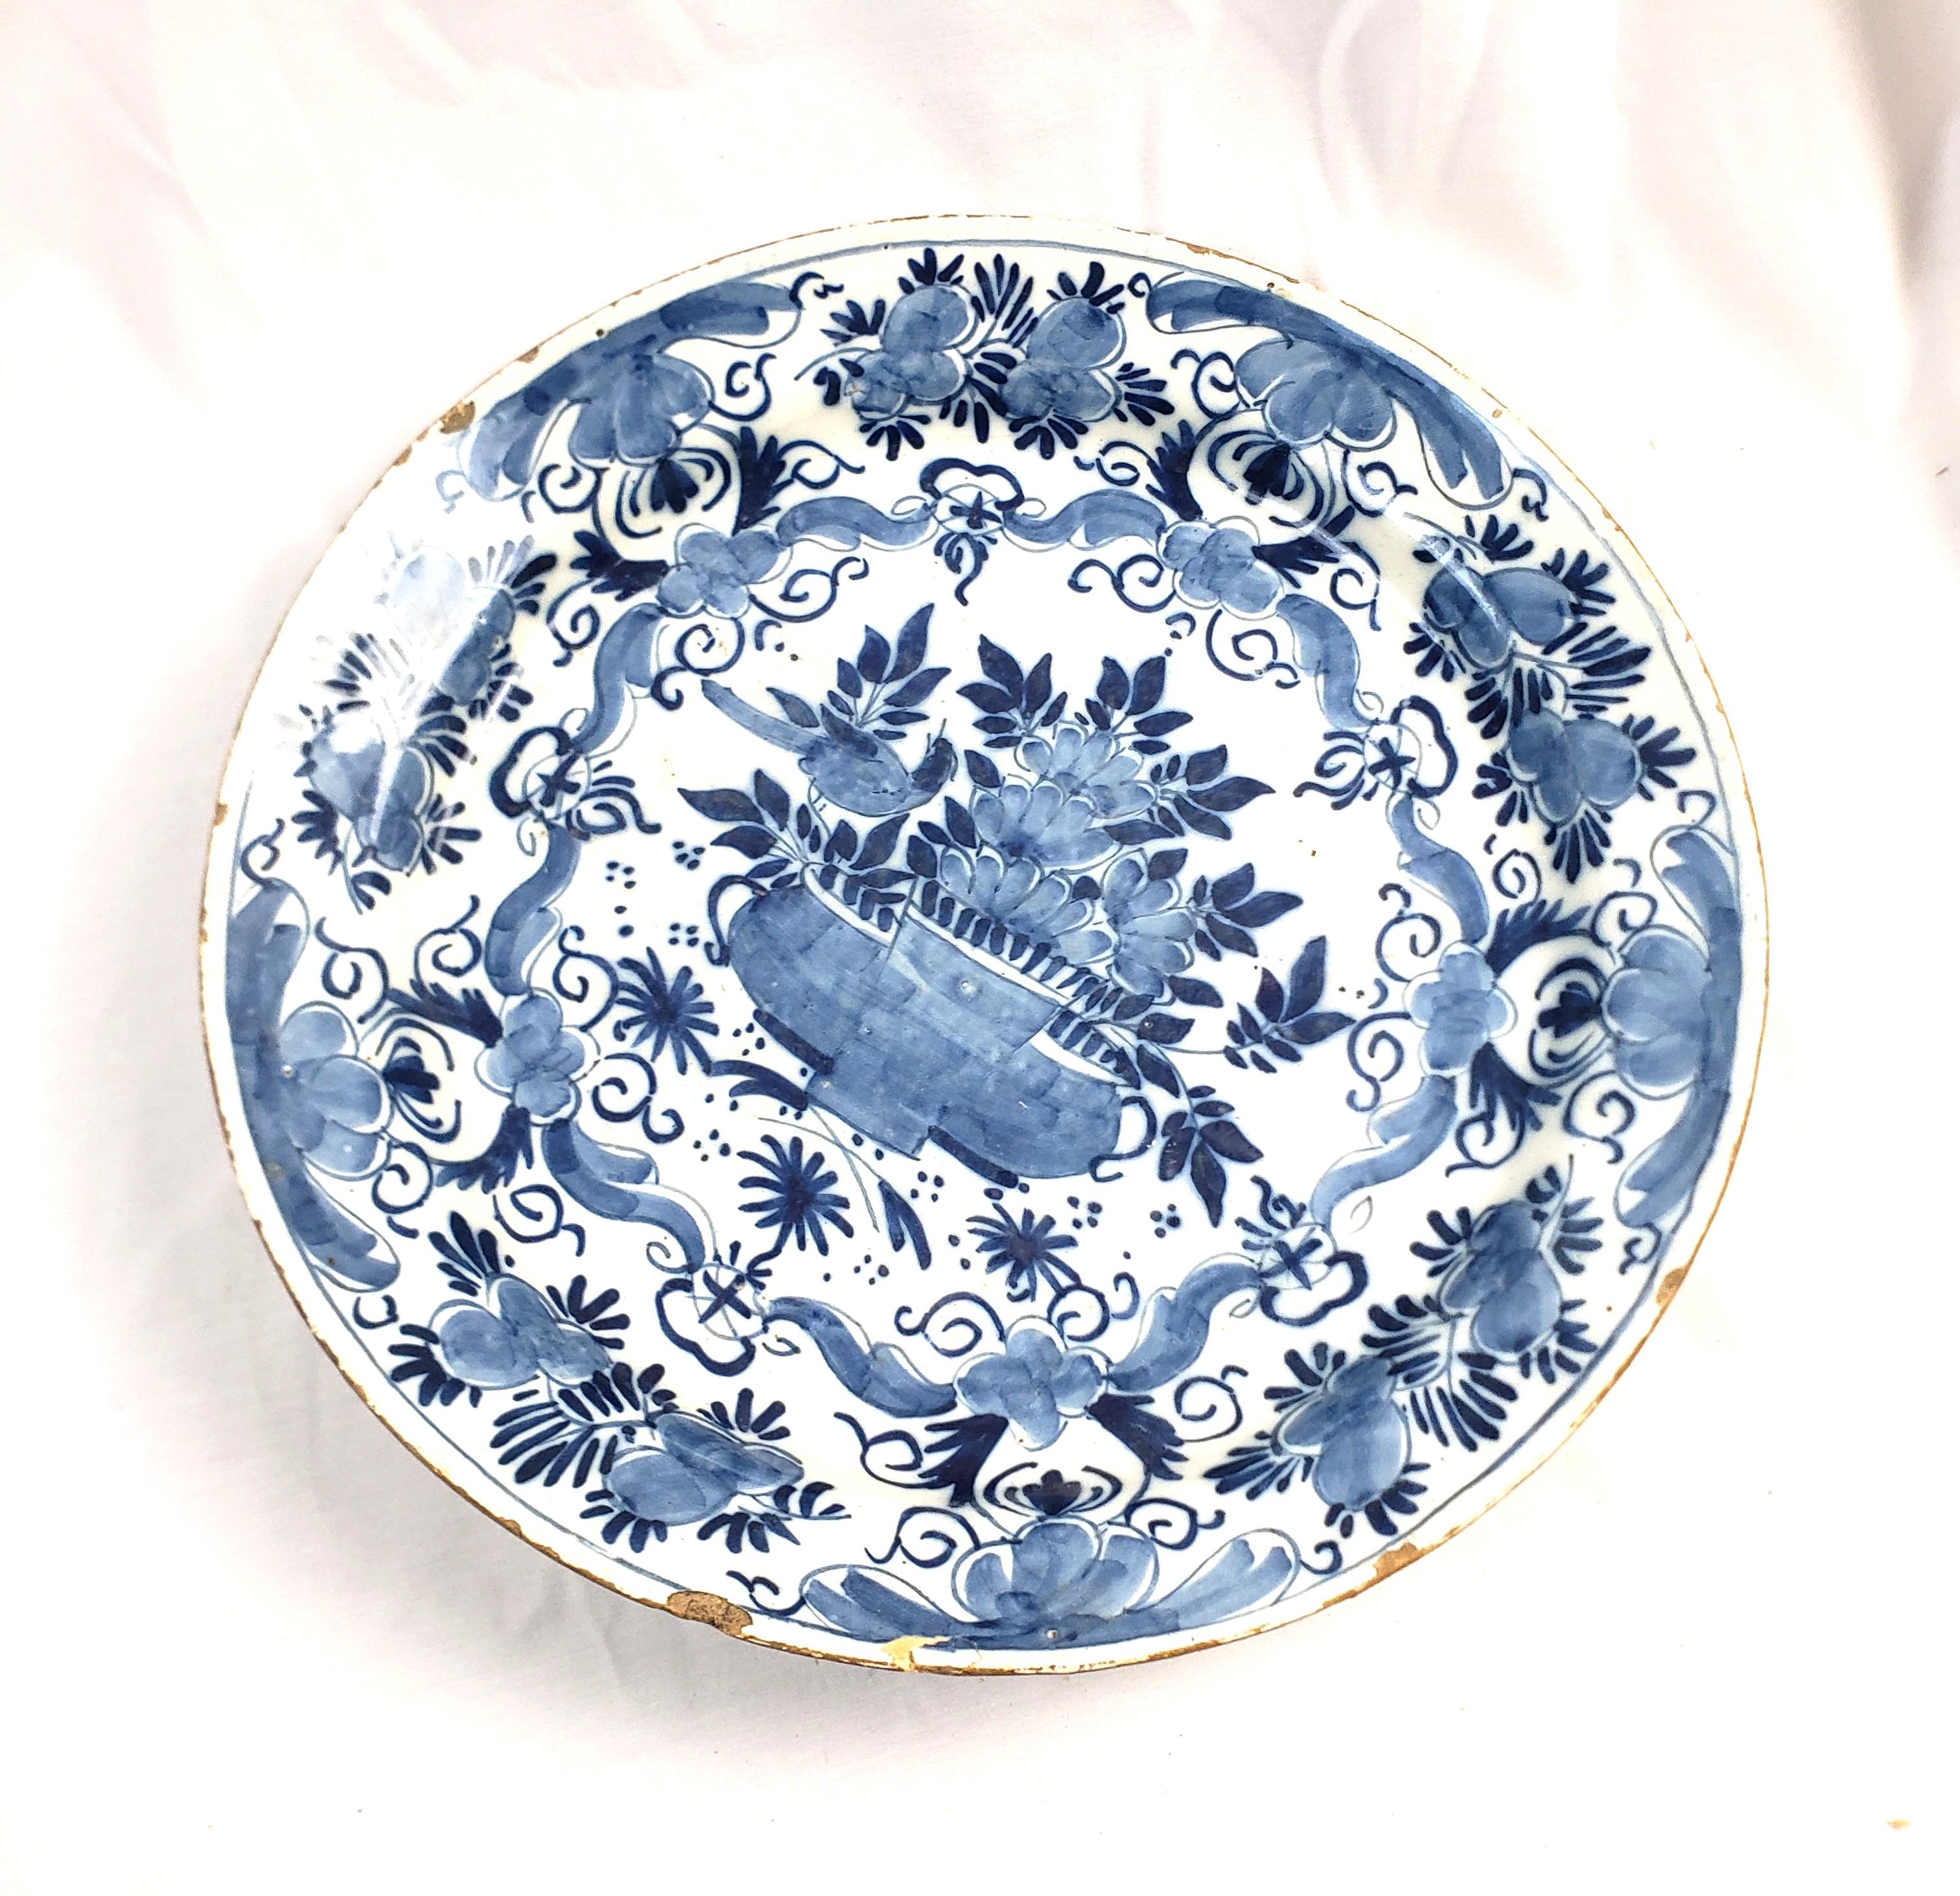 This antique charger is signed by an unknown maker, but presumed to have originated from the Netherlands and date to approximately 1750 and done in the period Delftware style. This early charger is composed of ceramic with a white ground and